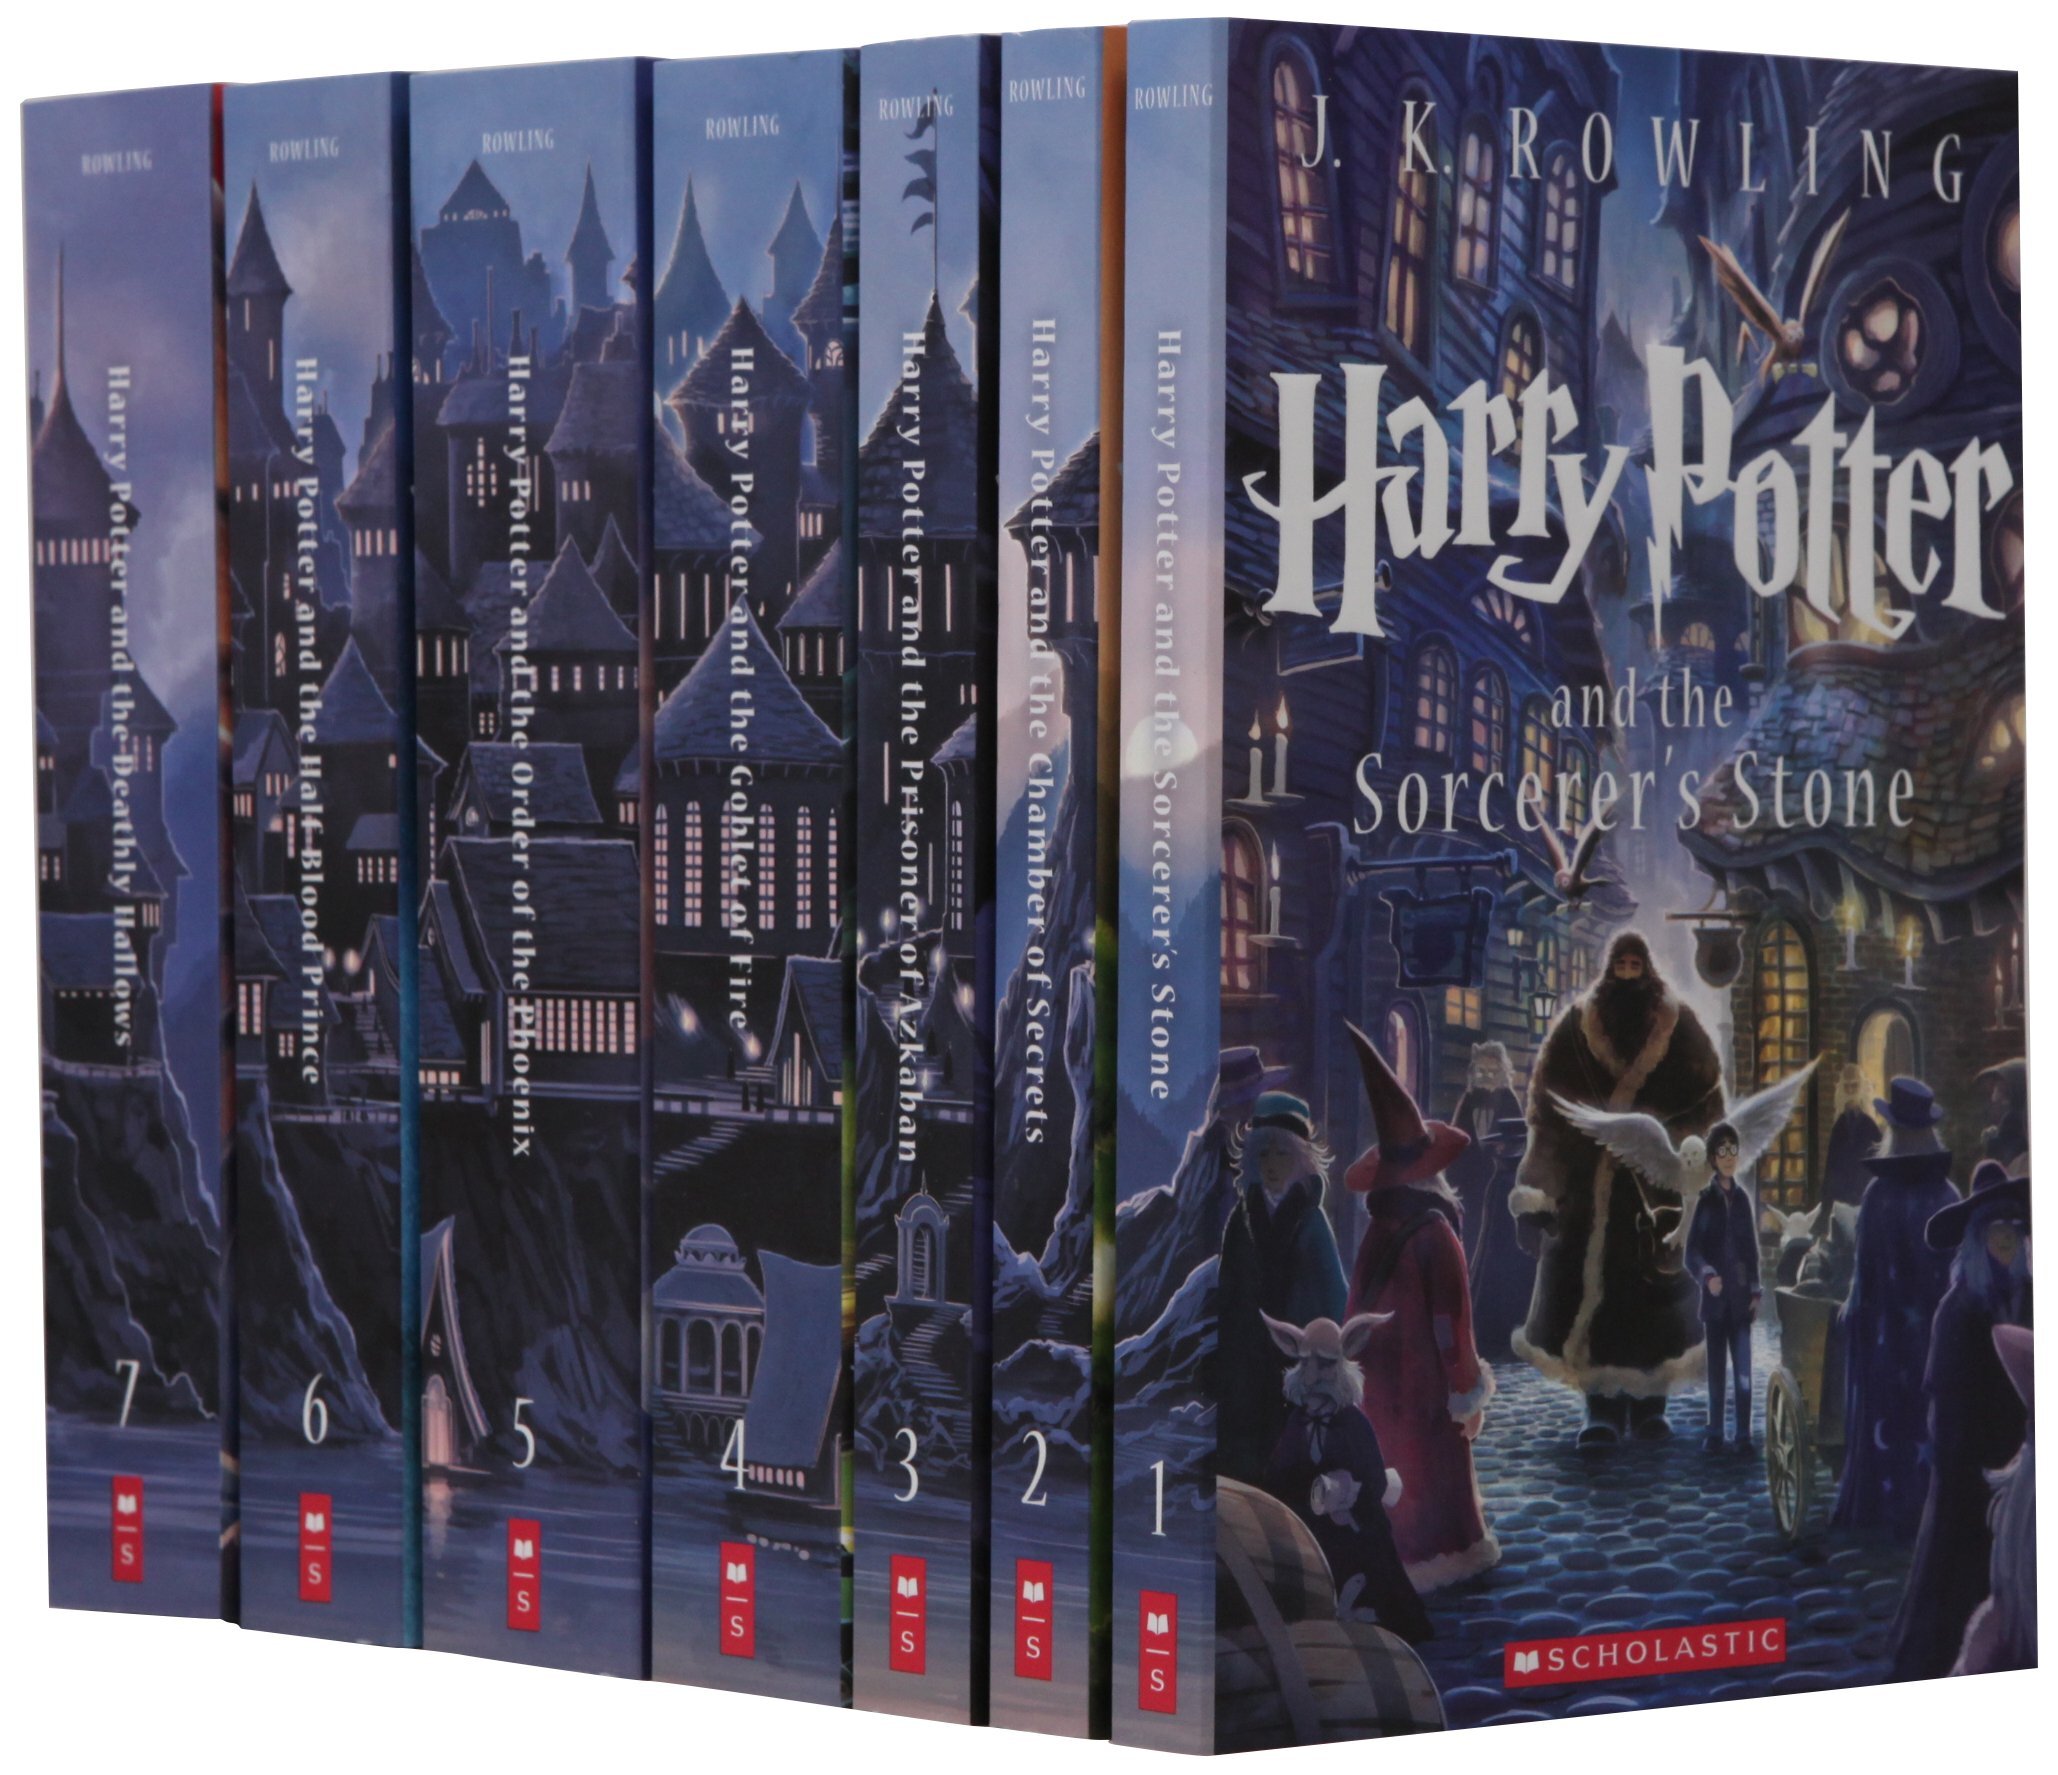 The 18 Best Harry Potter Book Sets, Collections and Limited